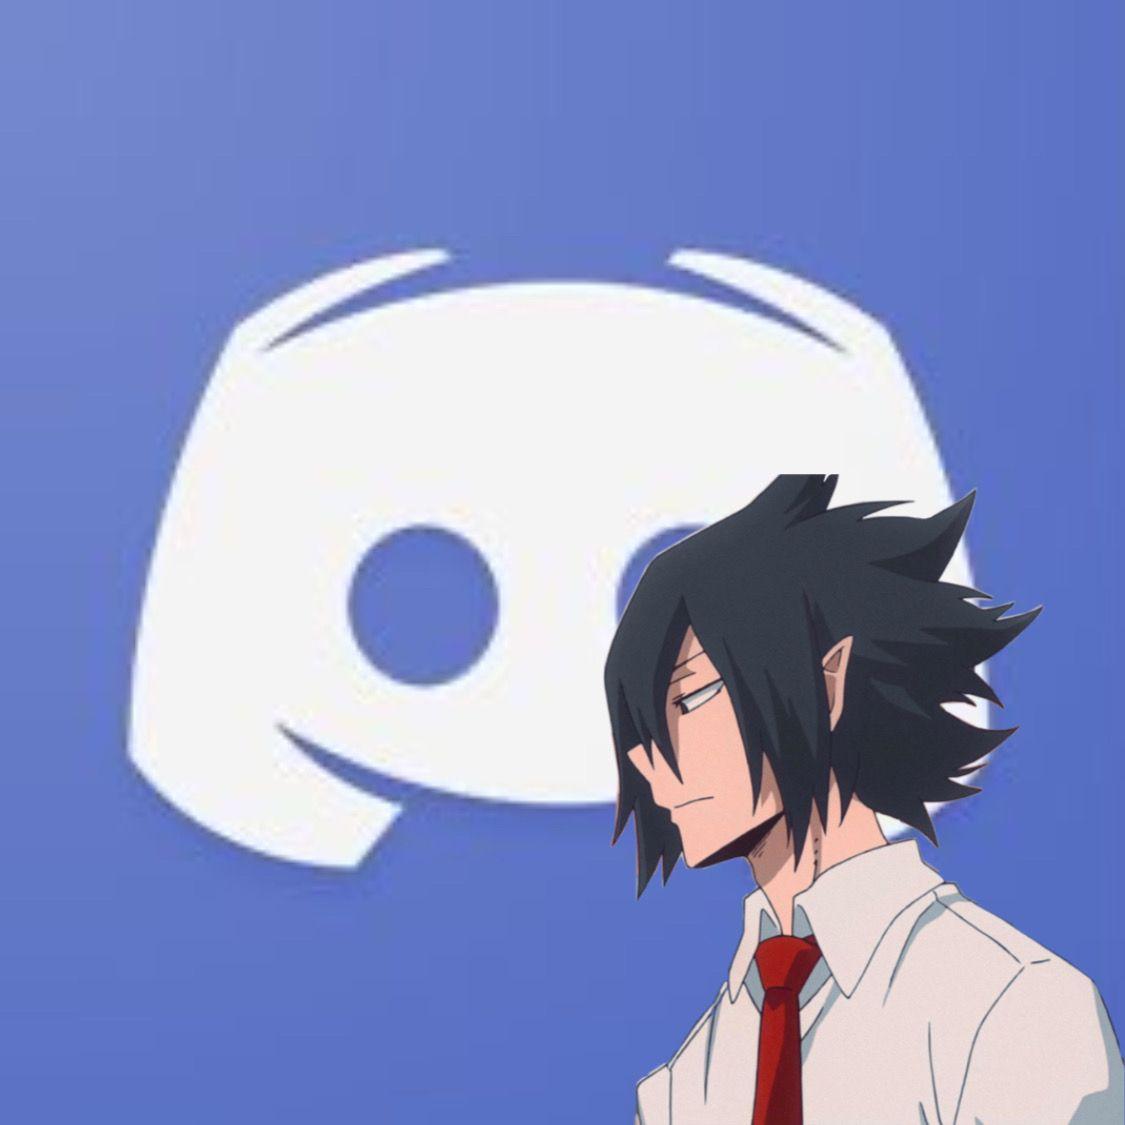 50 Free Anime App Icons for iOS/Android Devices